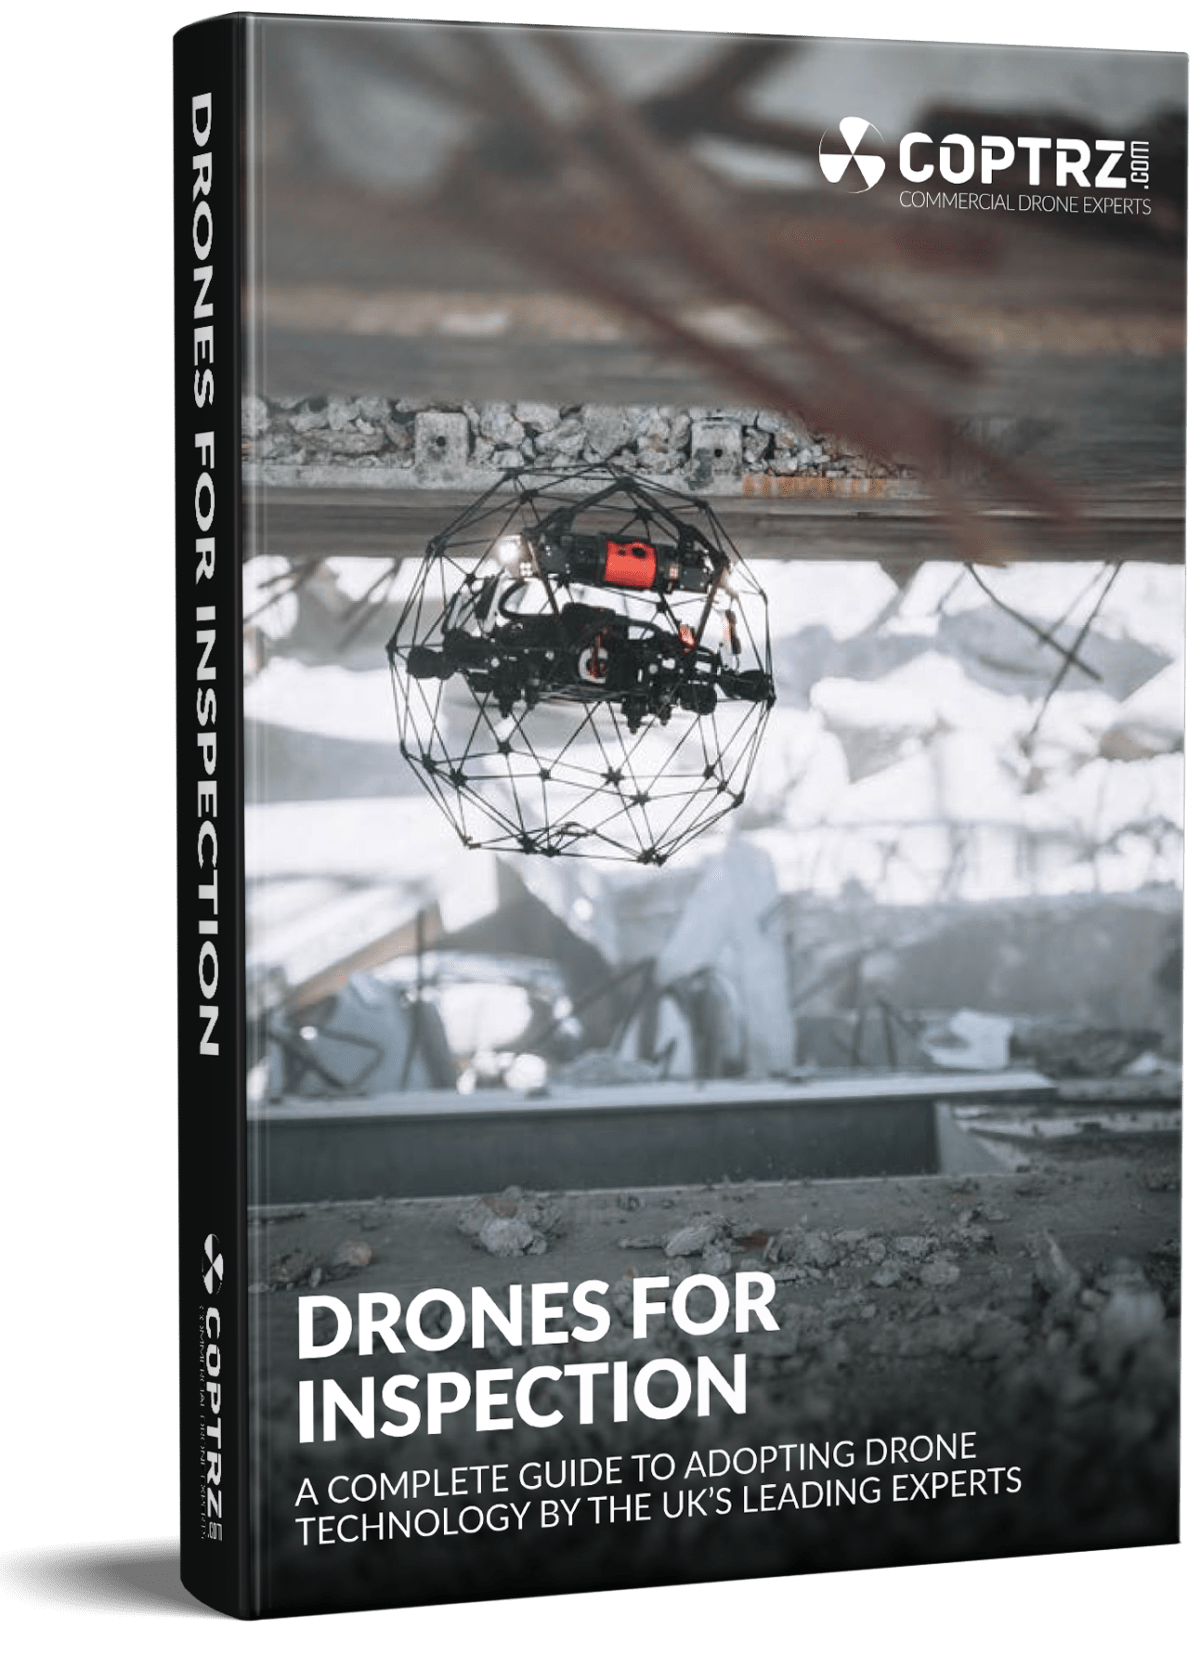 grund dump lastbil Coptrz | Drone Regulations Guide | COPTRZ | Full guide to new UK drone laws